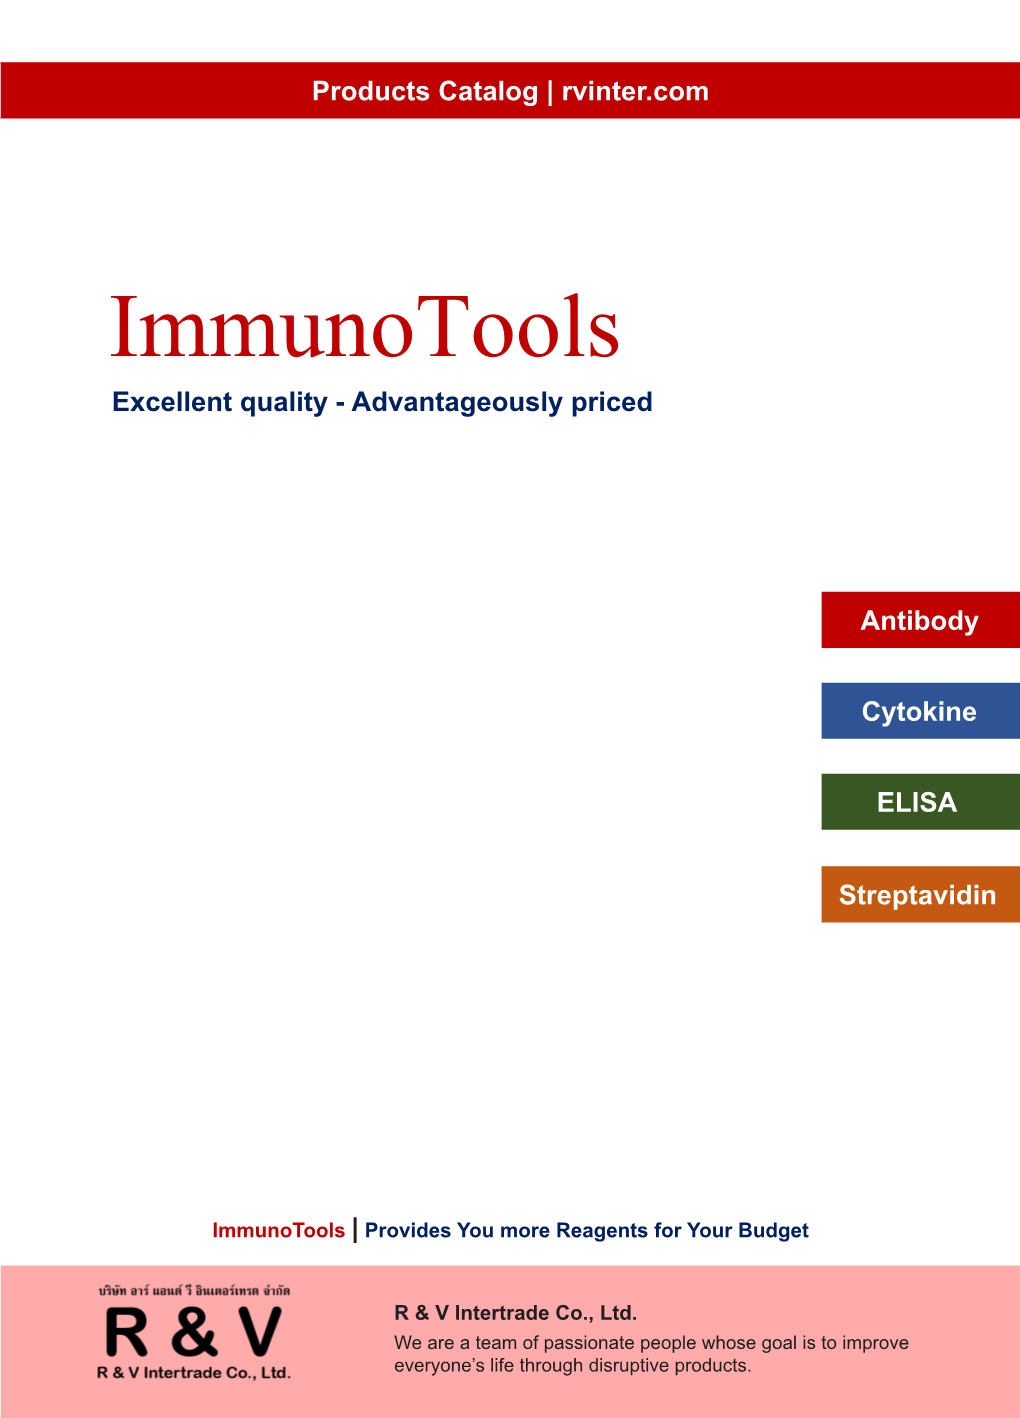 Immunotools Excellent Quality - Advantageously Priced